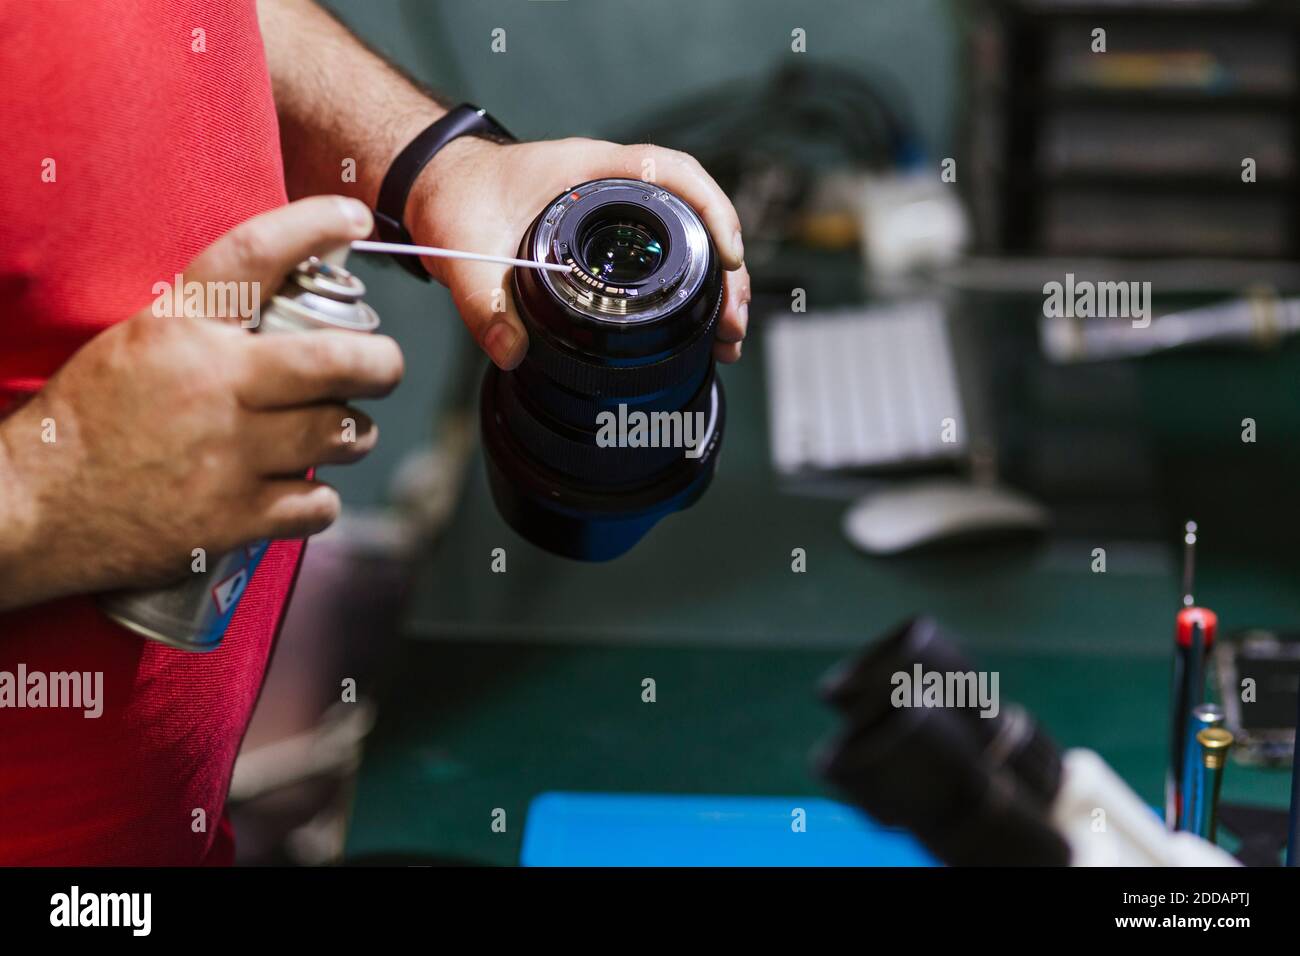 Repairman holding spray can and lens at electronics repair shop Stock Photo